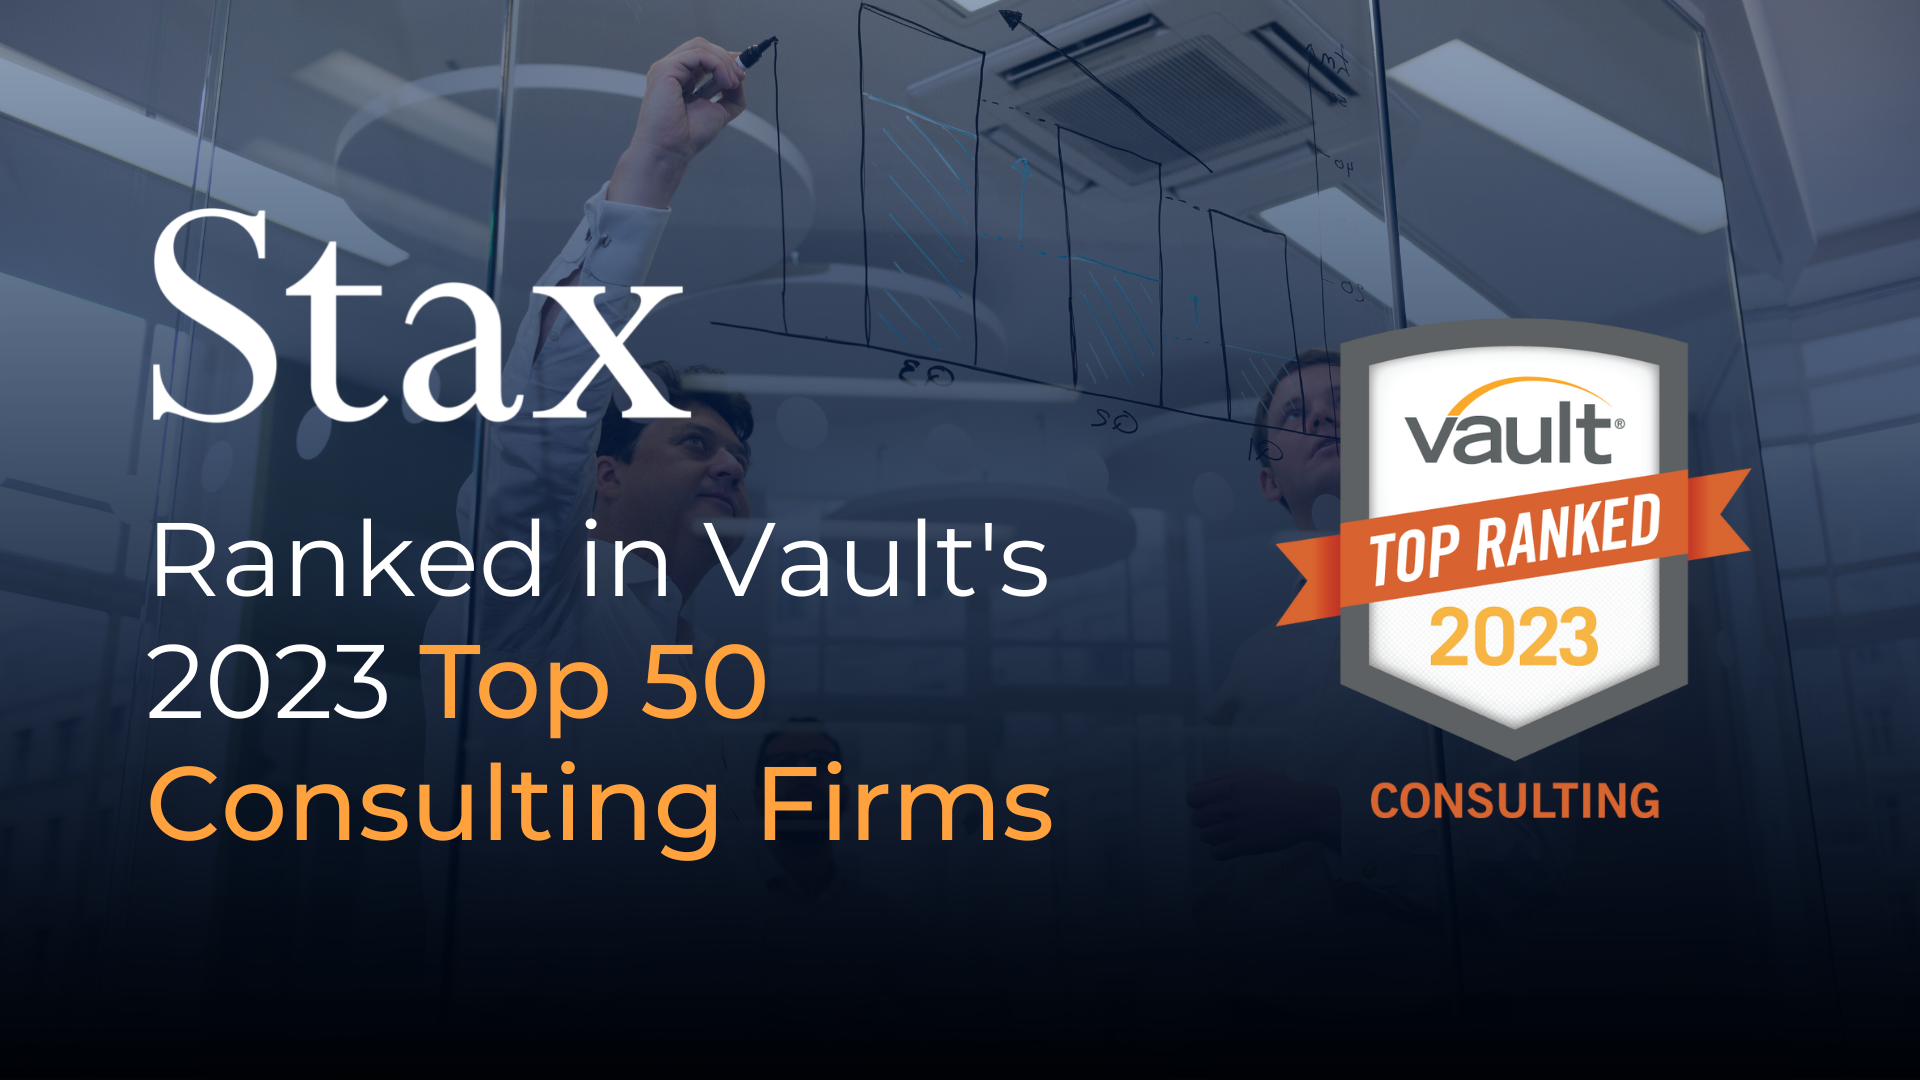 Stax Ranked on Vault's 2023 Top 50 Consulting Firms